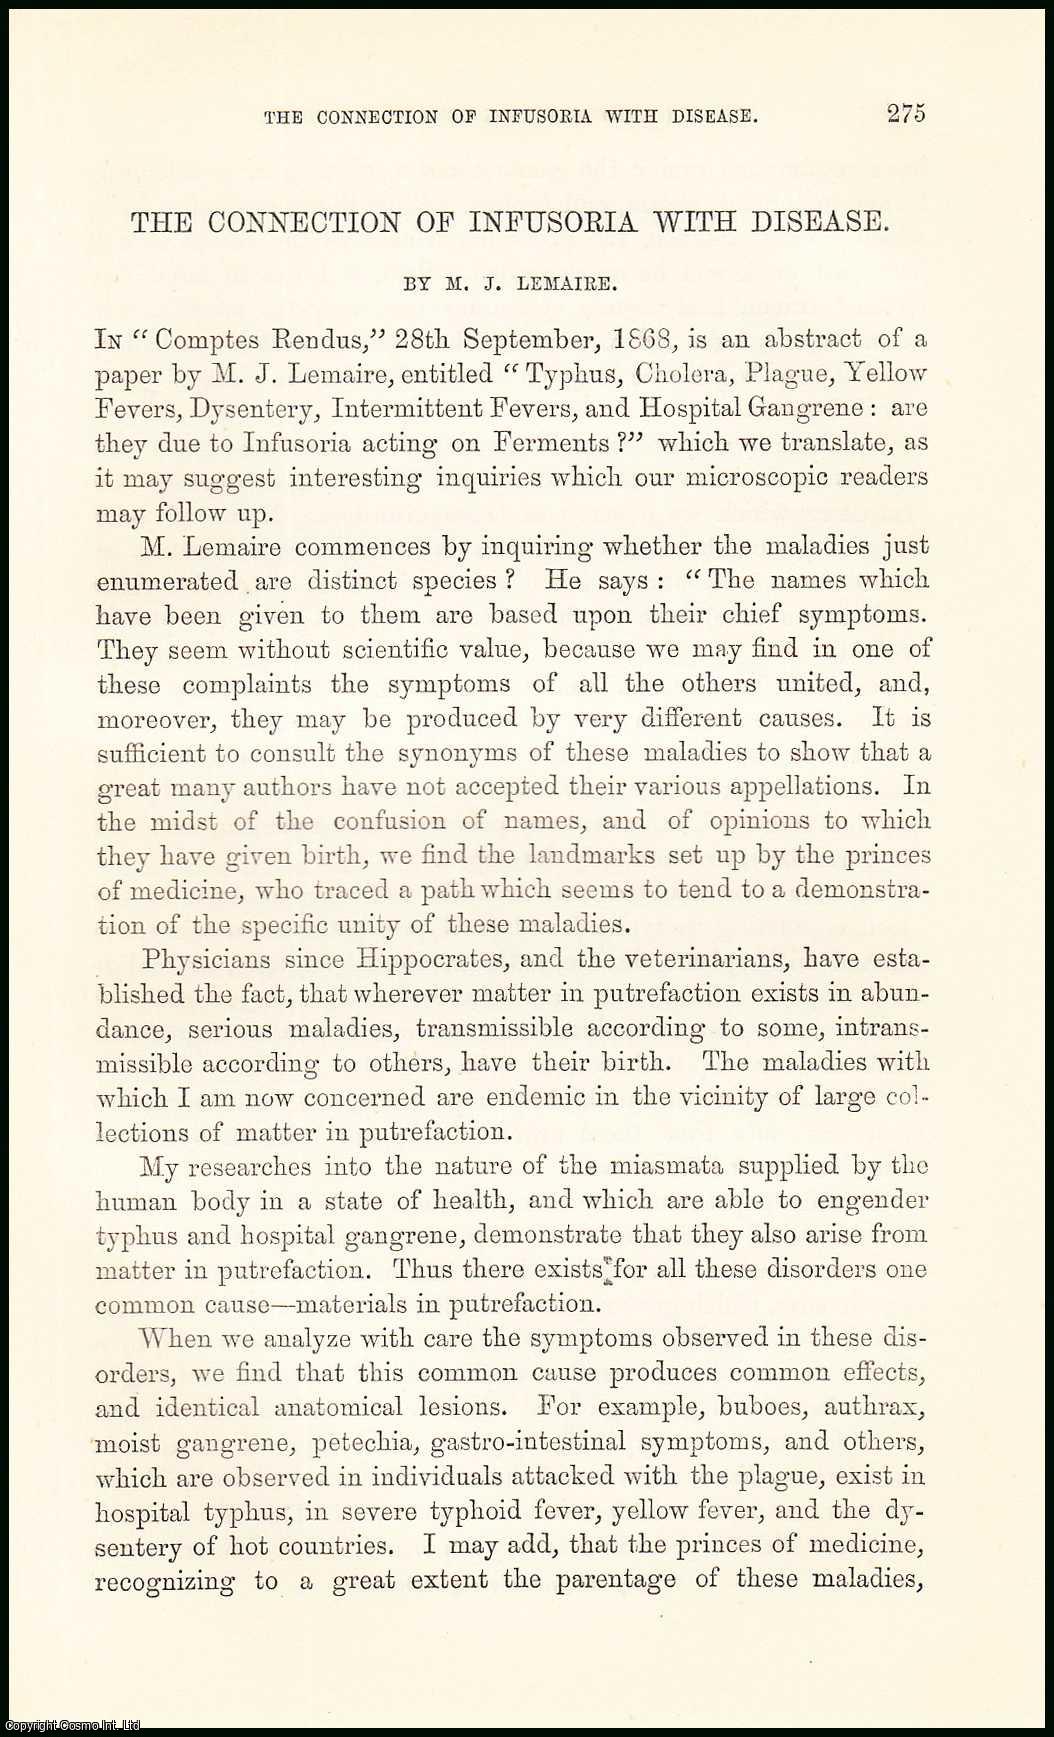 M.J. Lemaire - The Connection of Infusoria with Disease. An original uncommon article from the Intellectual Observer, 1869.